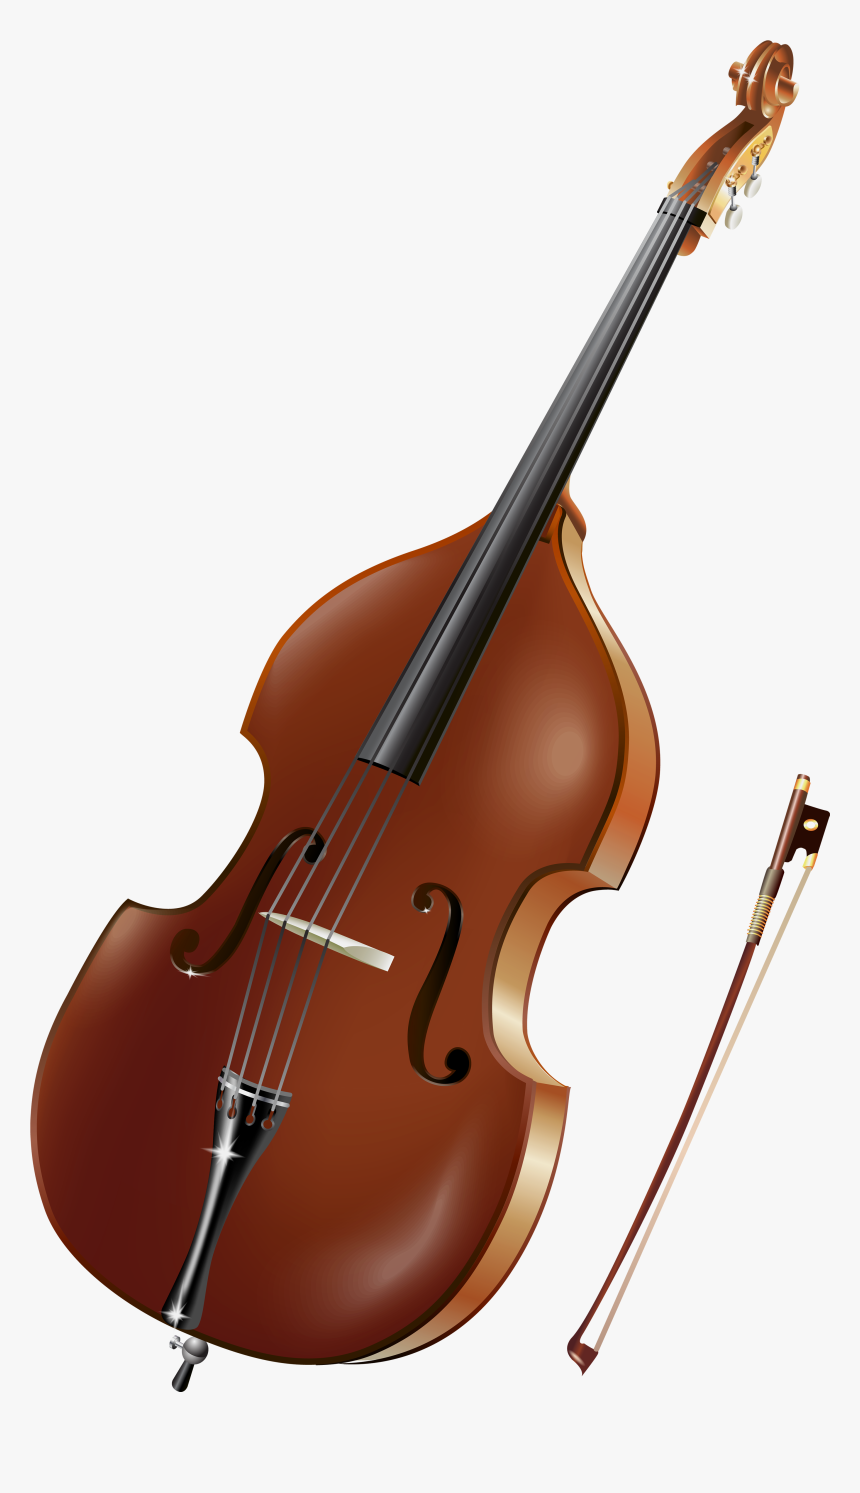 Double Bass Instrument Png, Transparent Png, Free Download